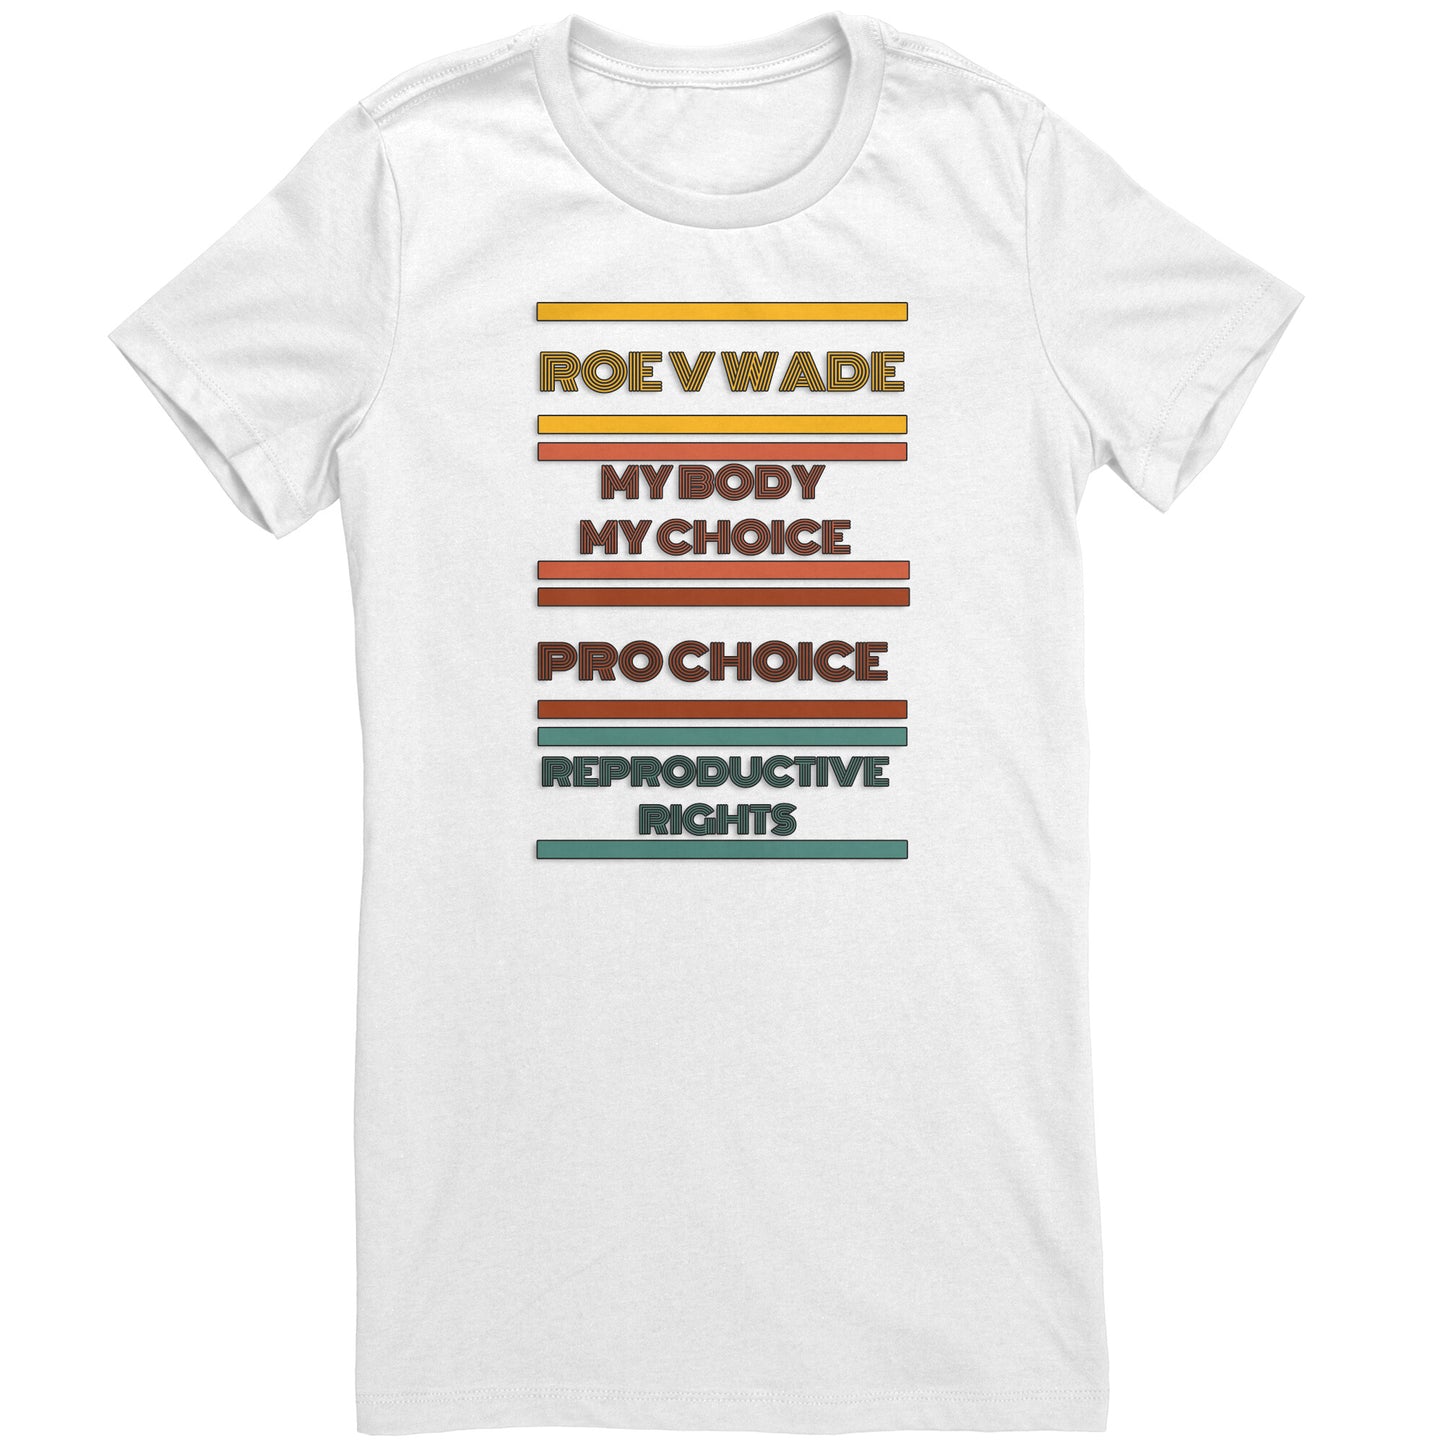 Girls Just Wanna Have Human Rights, Pro Choice T-Shirt, Rights Shirt for Women, Women's Rights